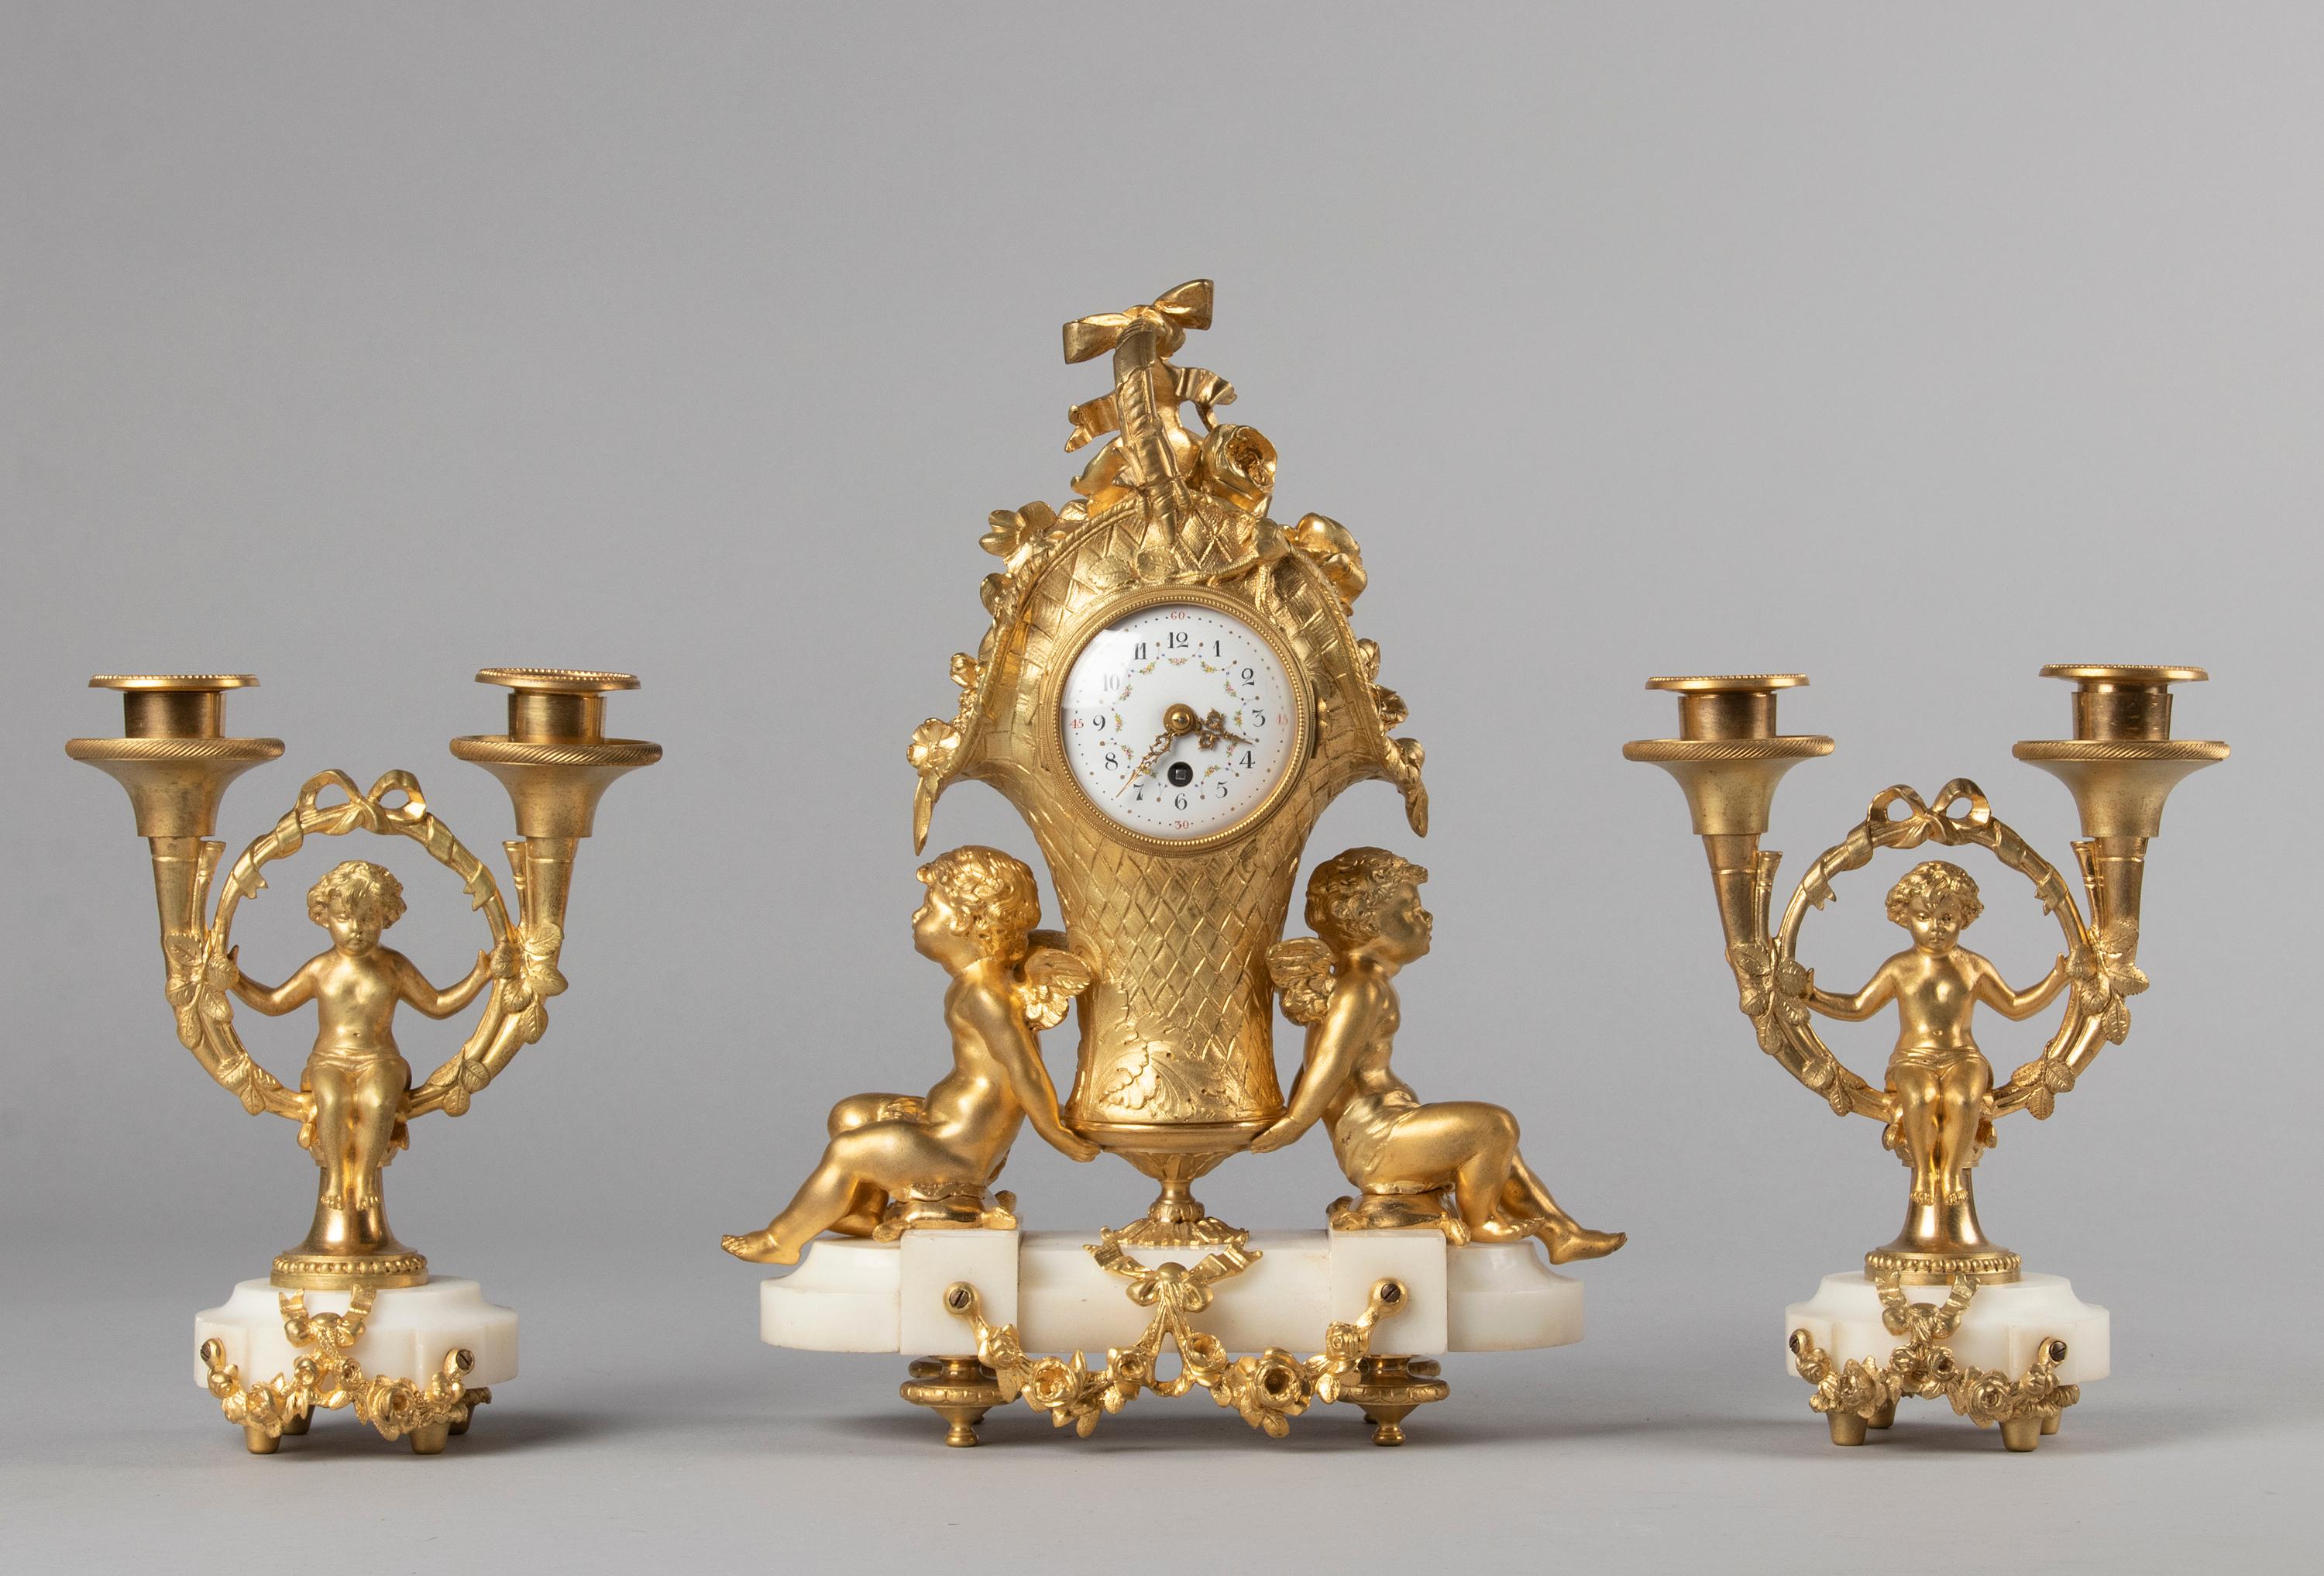 A very fine Louis XVI style figural mantel clock with matching flanking candelabra. The clock is bronze casted and has an ormolu finish, the dial is enameled iron. Resting on a white marble base. Richly embellished with neoclassical ornaments,